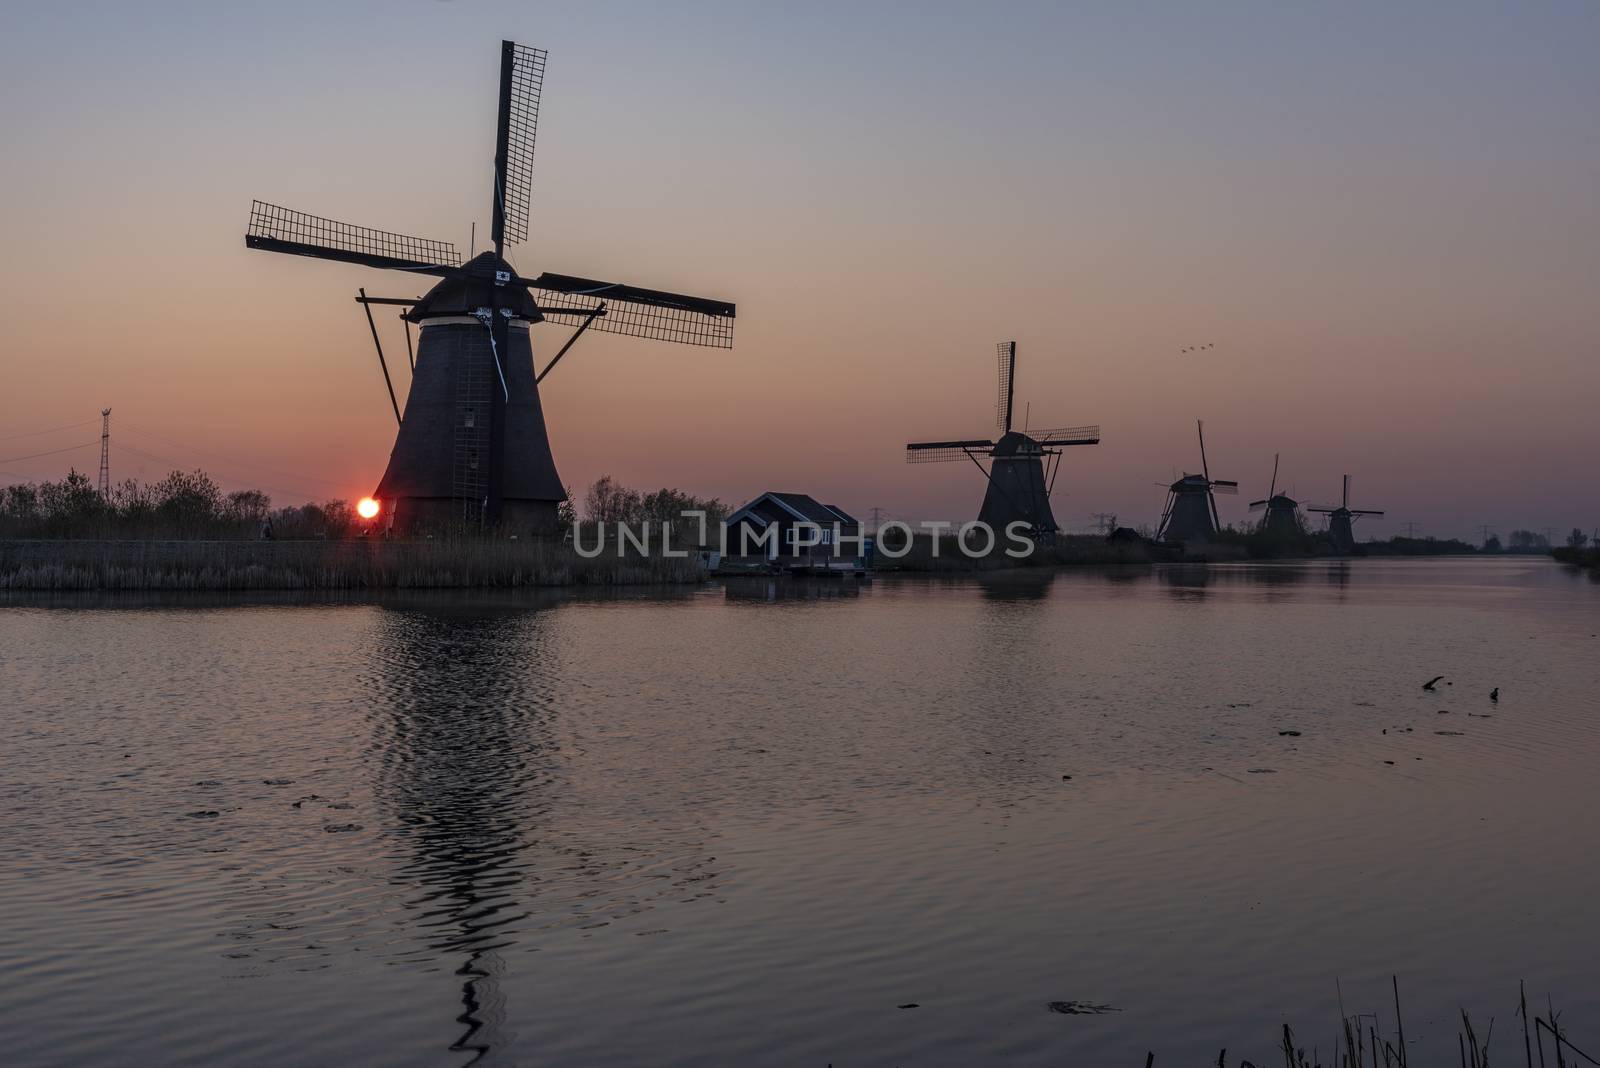 Sunrise on the alignment of windmills reflected on the calm water in the long canal  by ankorlight